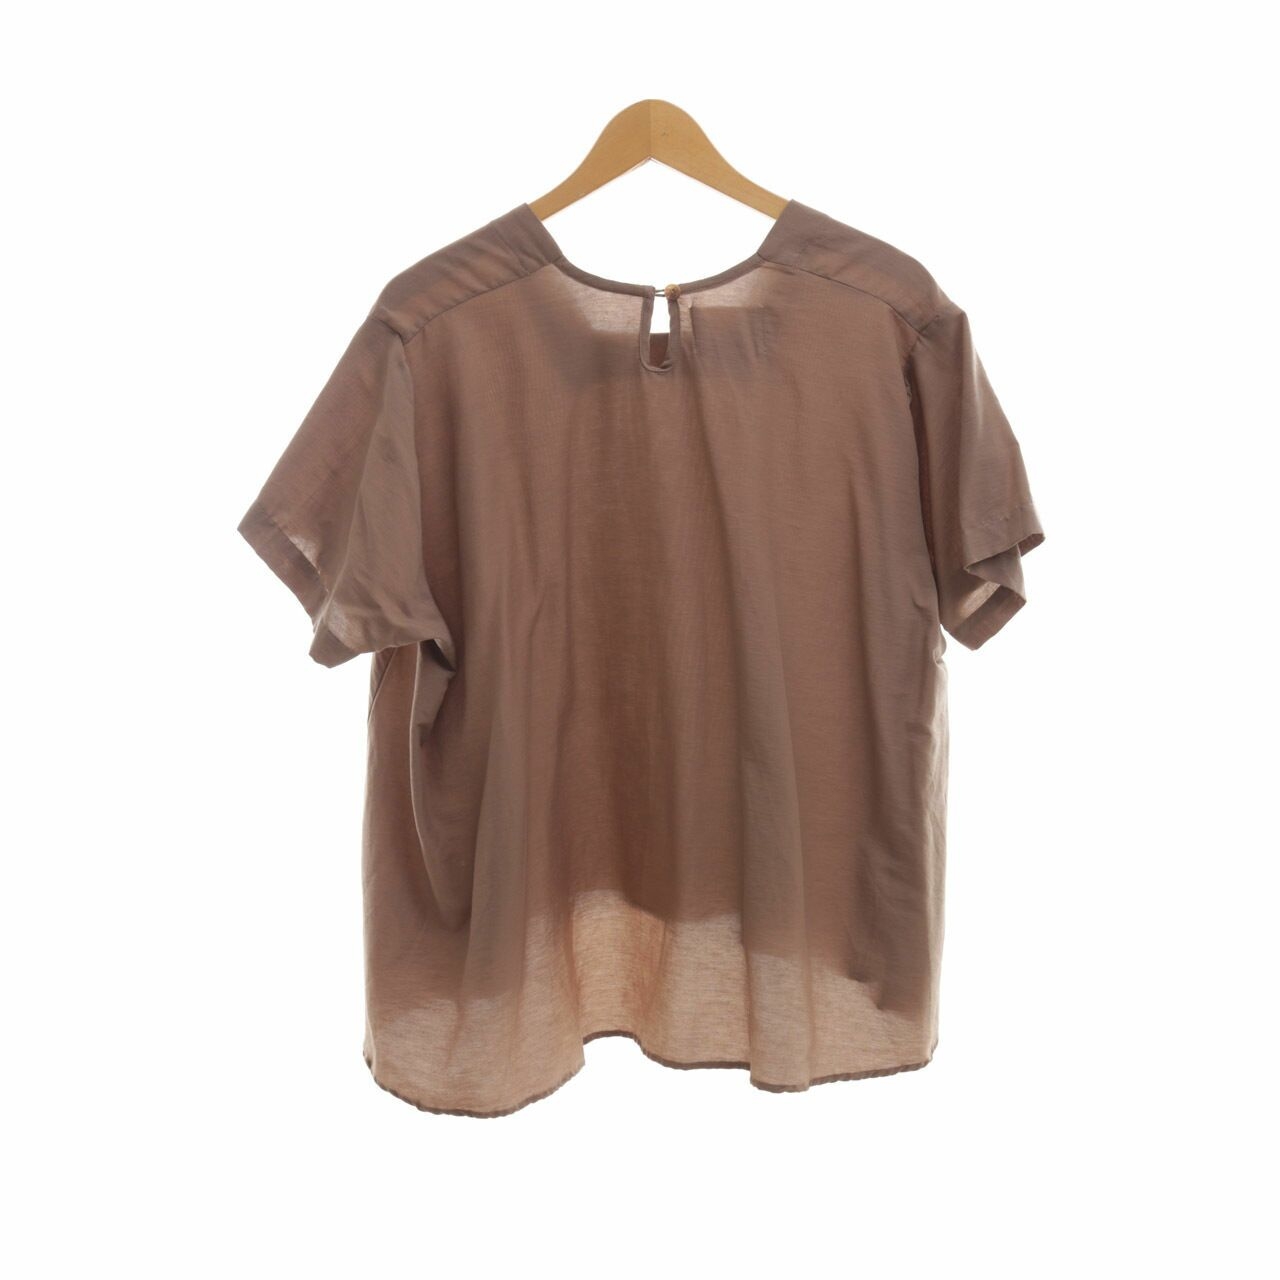 Chic & Darling Brown Blouse